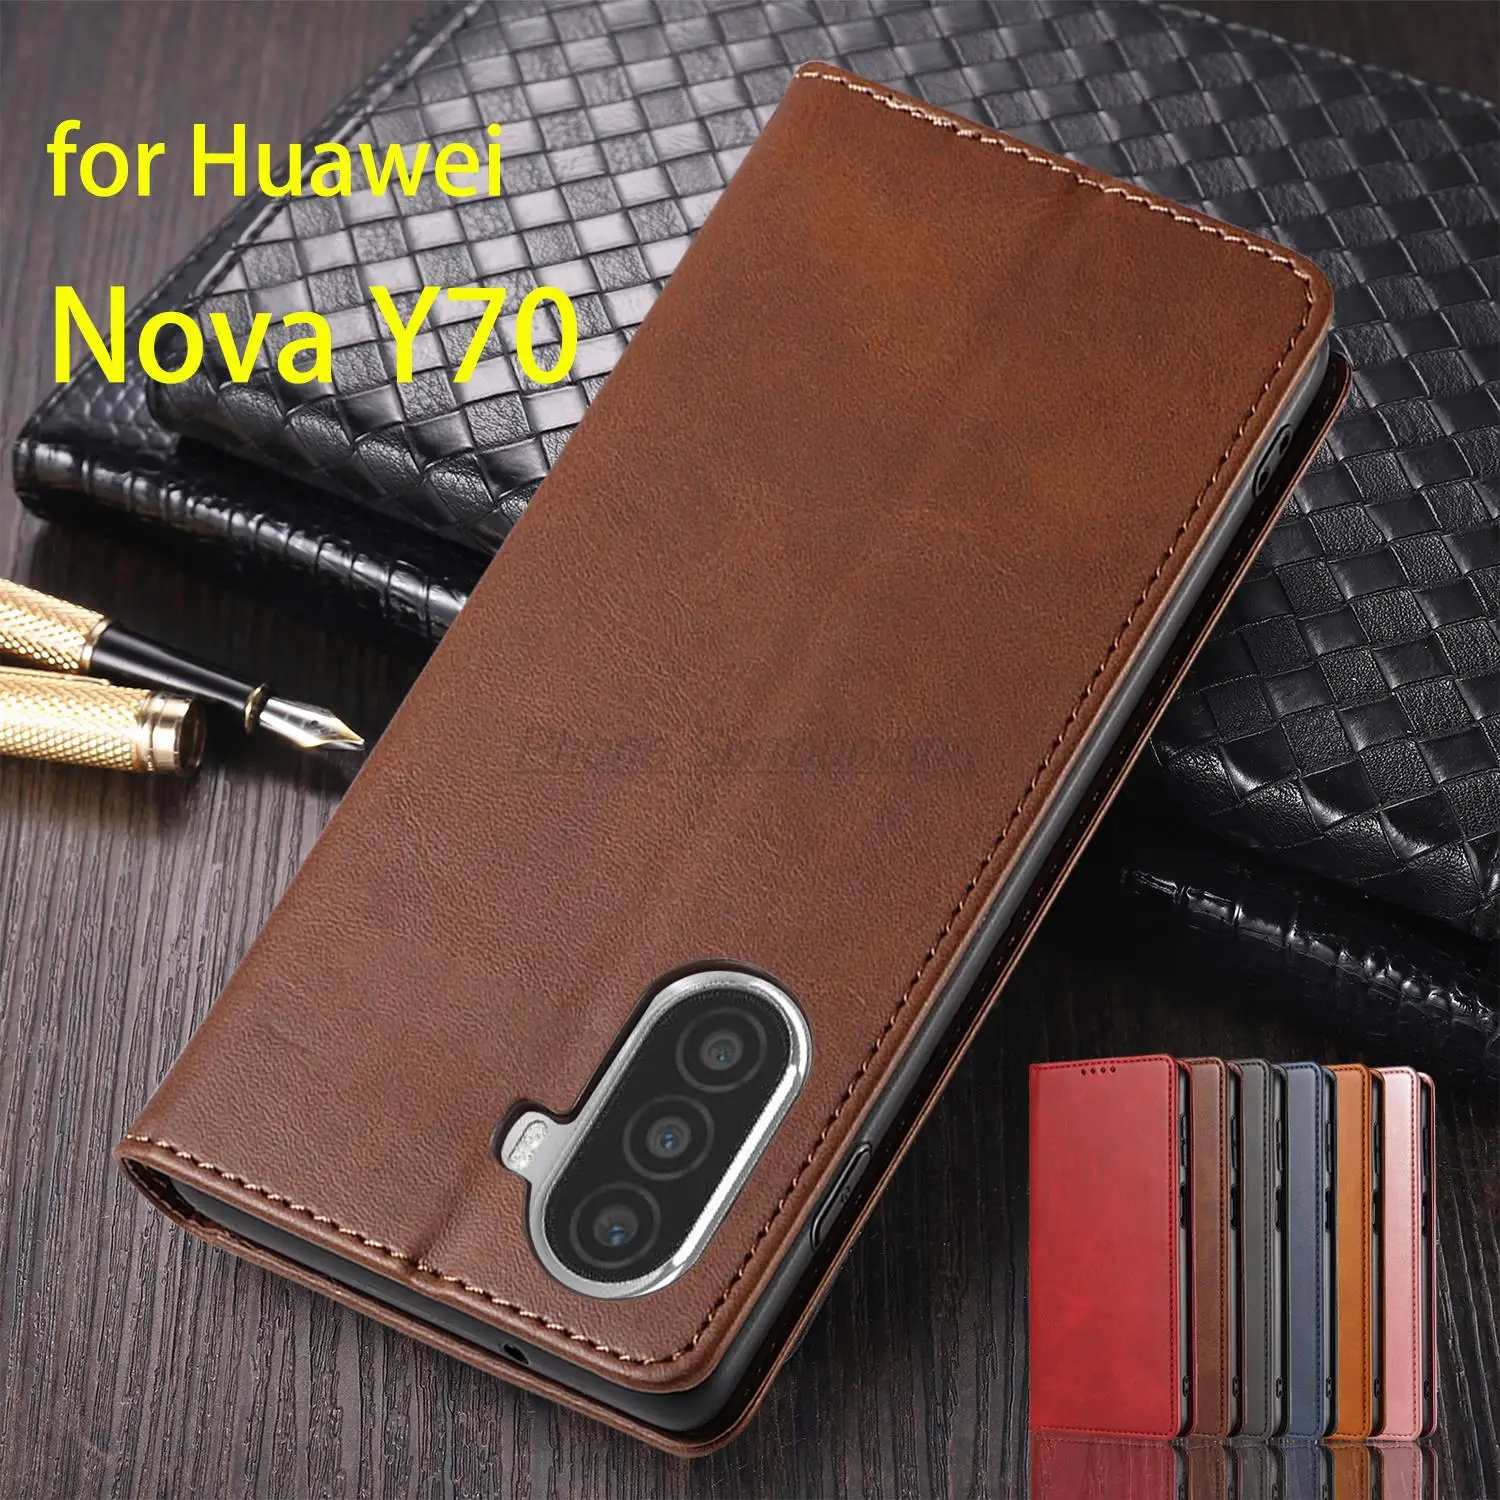 

Leather Case for Huawei Nova Y70 /Nova Y70 plus Wallet Flip Case Card Holder Holster Magnetic Attraction Cover Case Fundas Coque